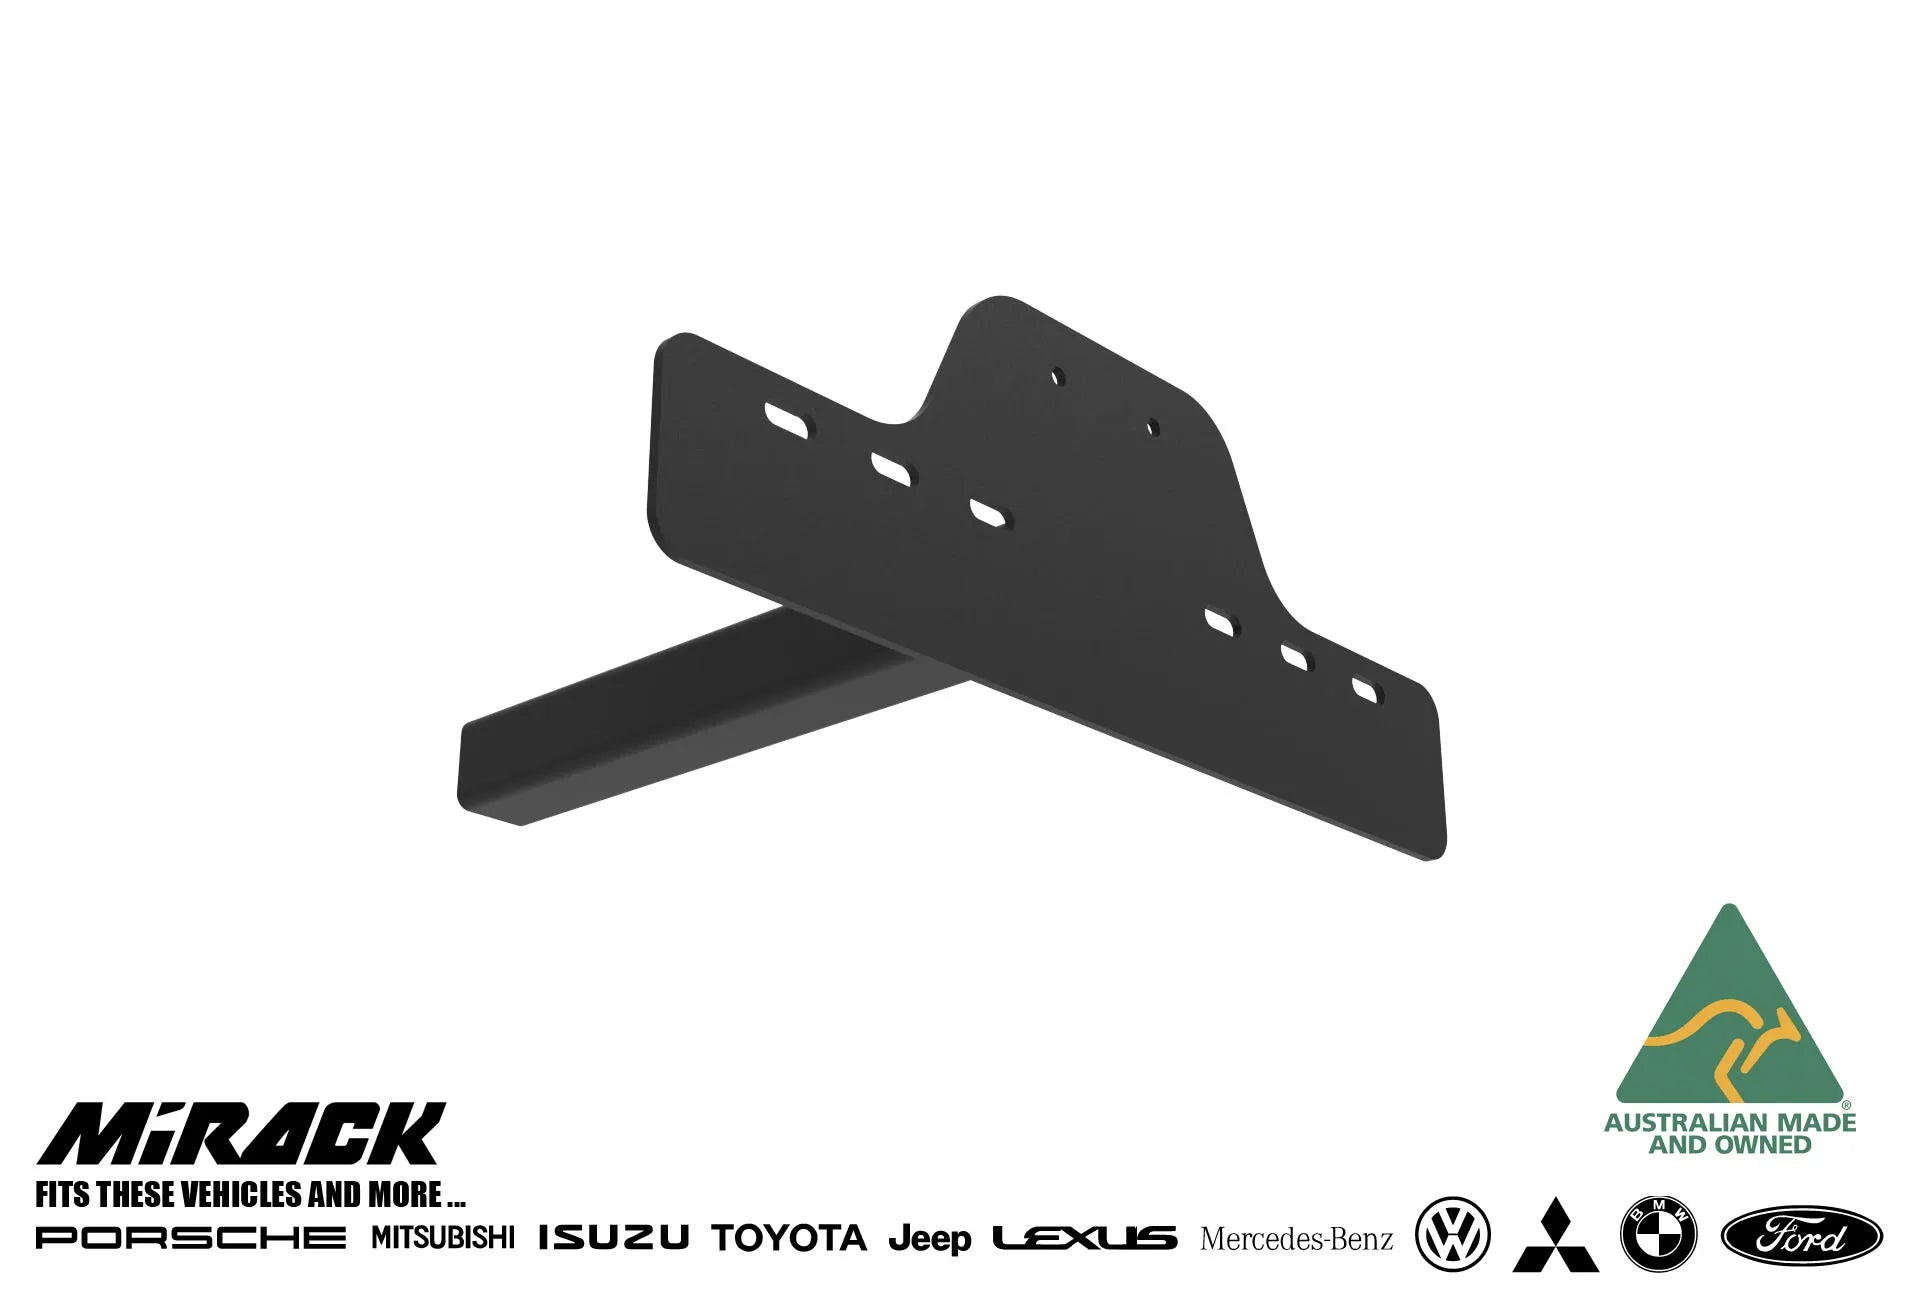 3D visualization: Elevate your ride with Mirack's stylish and secure number plate holders.